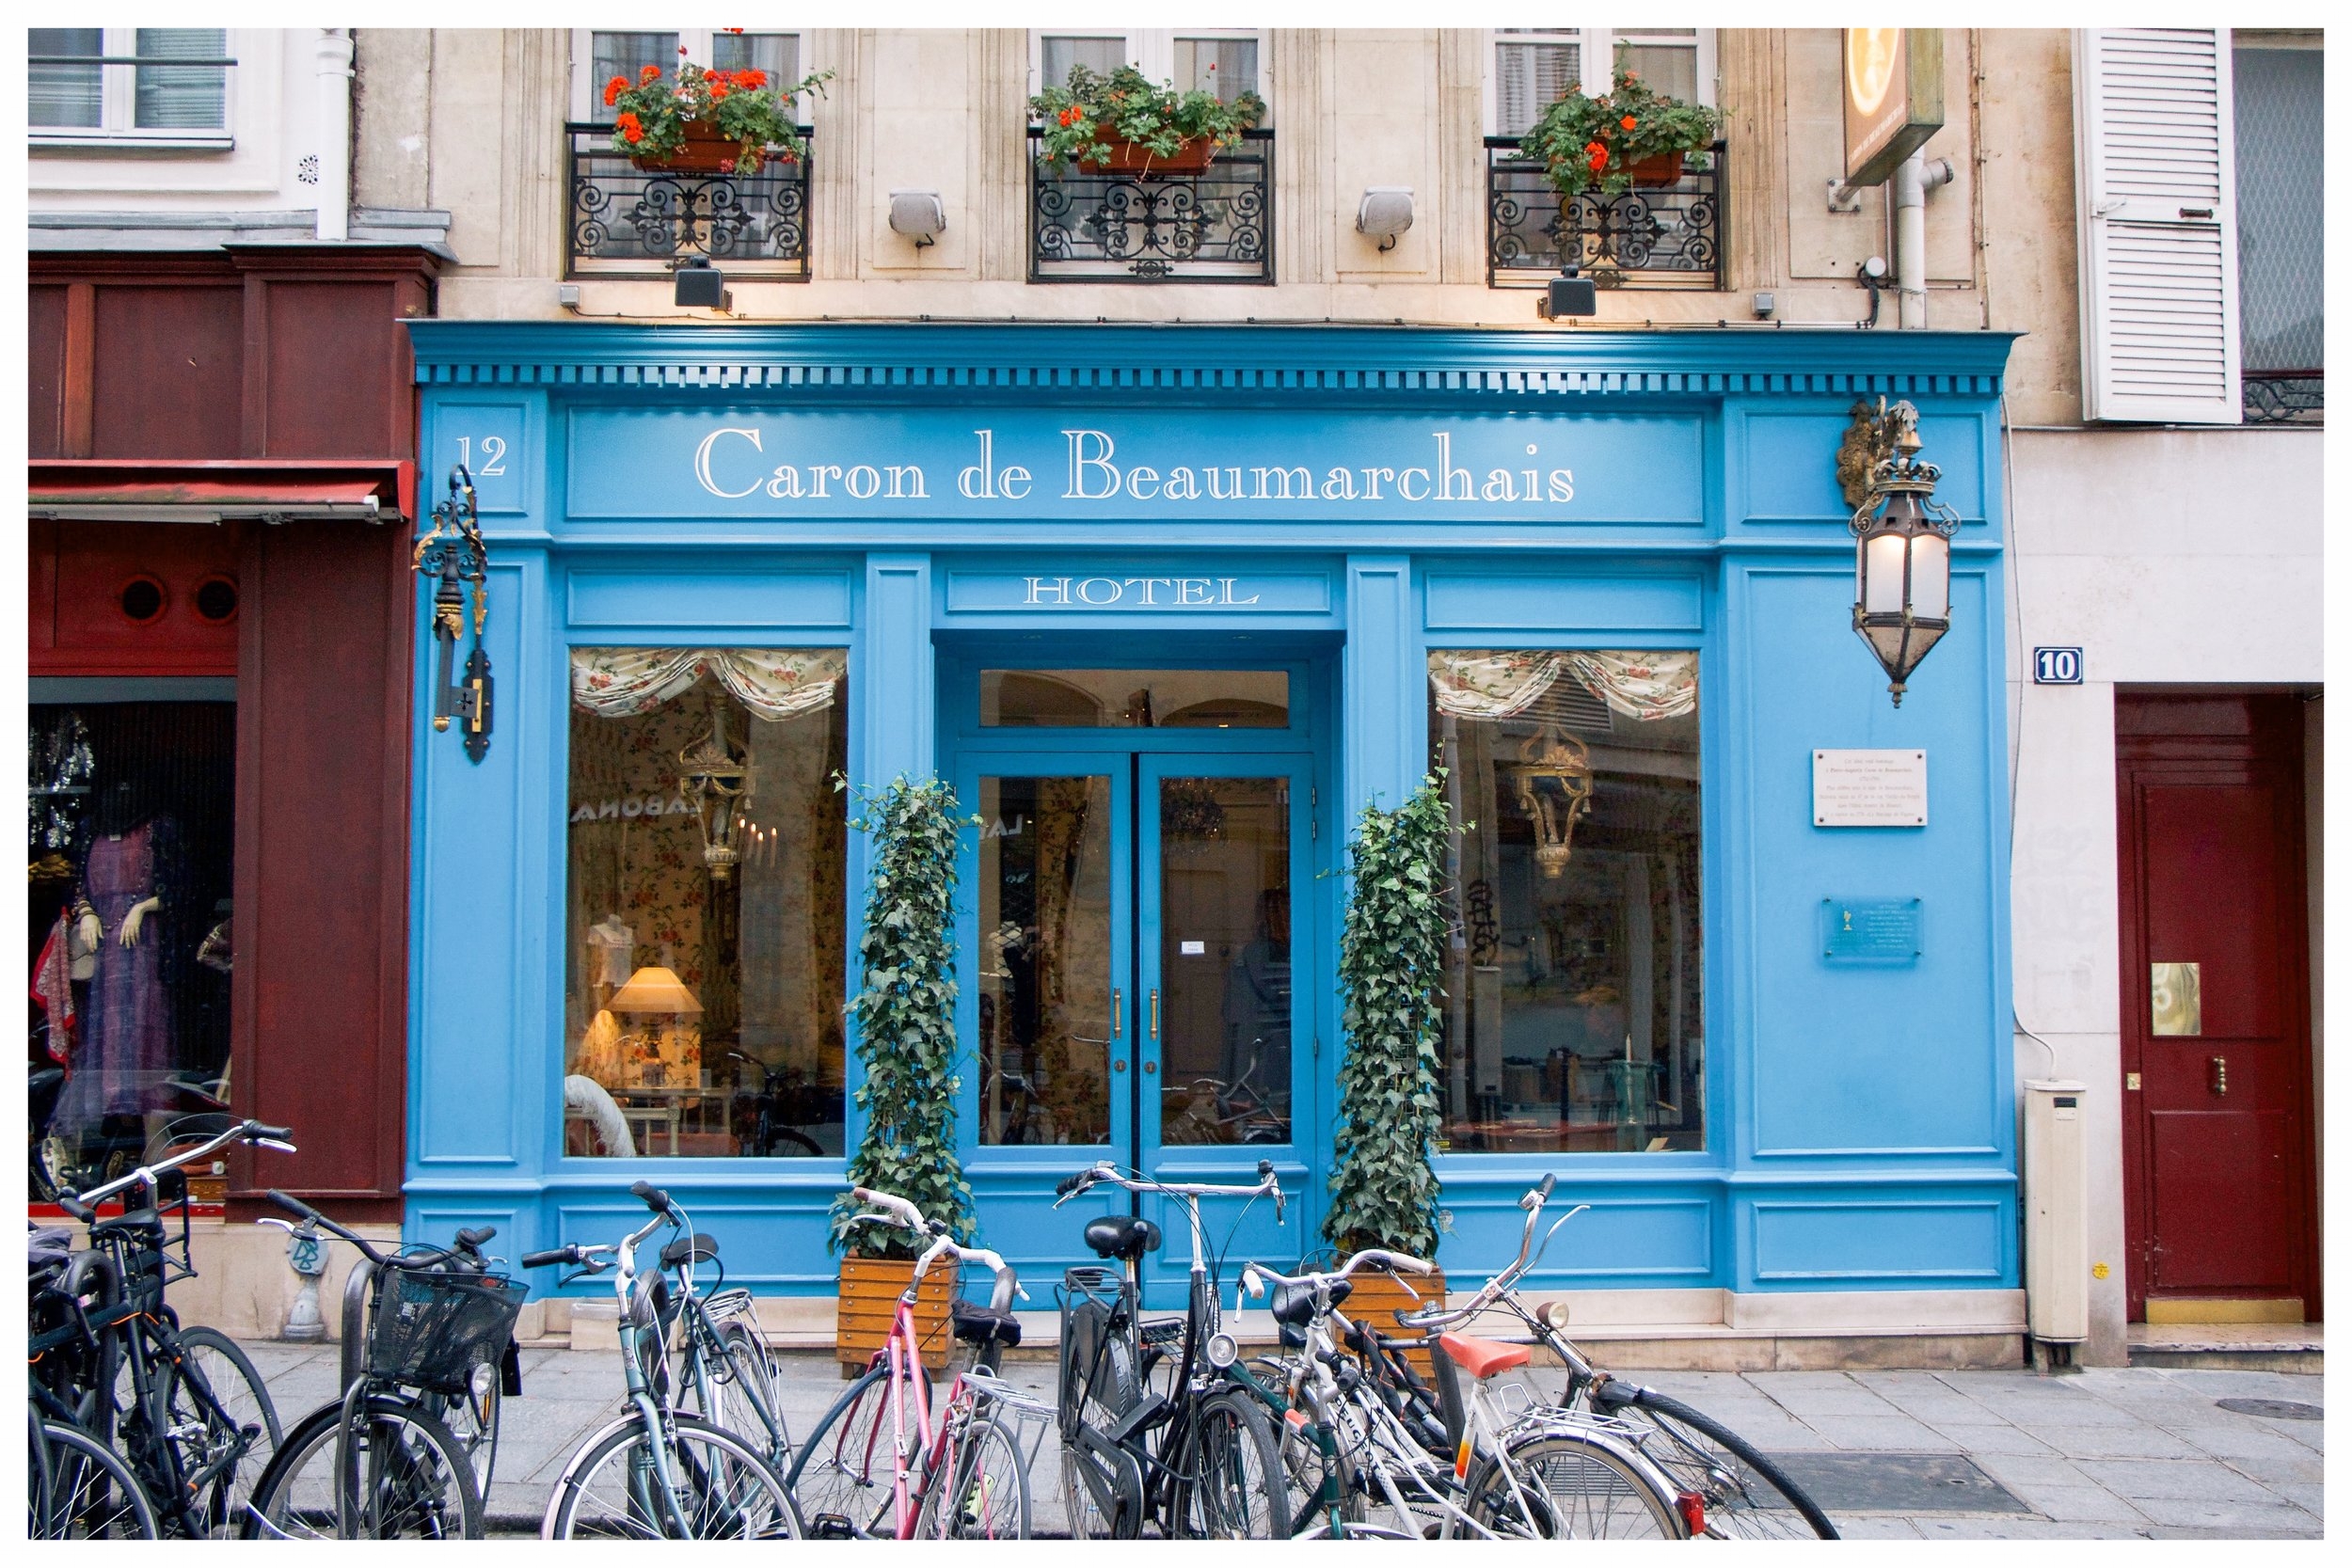 The Most Charming Boutique Hotel in Paris, France | This budget-friendly boutique hotel in the heart of the Marais is one of the most romantic places to stay in the City of Light. Hotel Caron de Beaumarchais has affordable rates, wonderful service, …